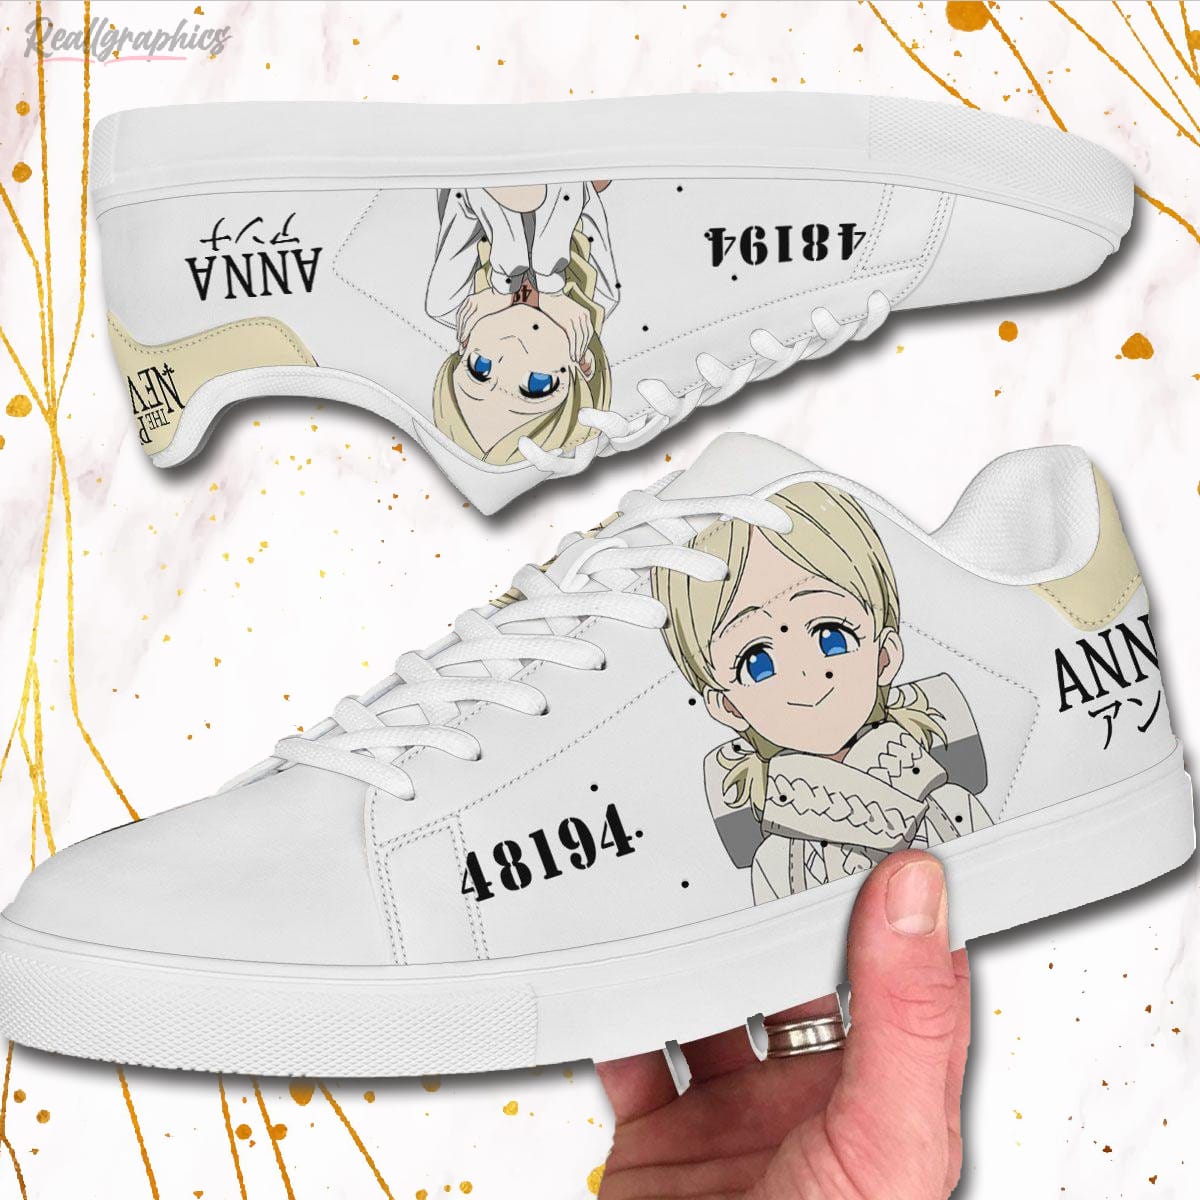 anna skate sneakers the promised neverland custom anime shoes 2 hnpers